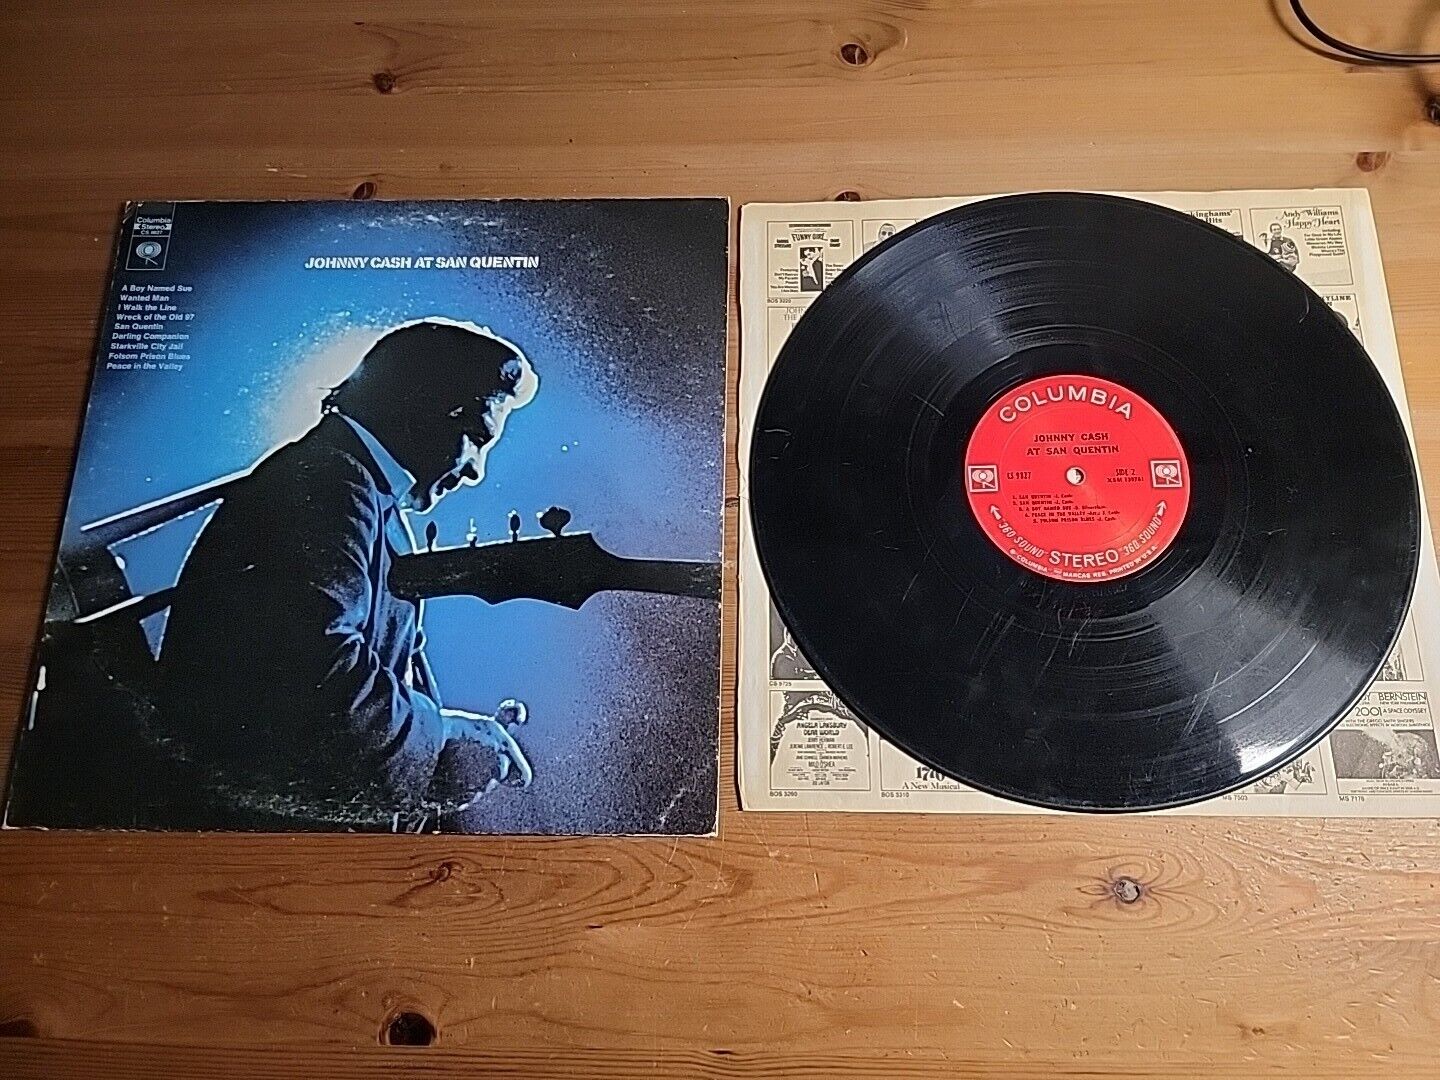 Vintage 1969 Johnny Cash "At San Quentin" LP - (CS-9827) Scratched NOT Tested